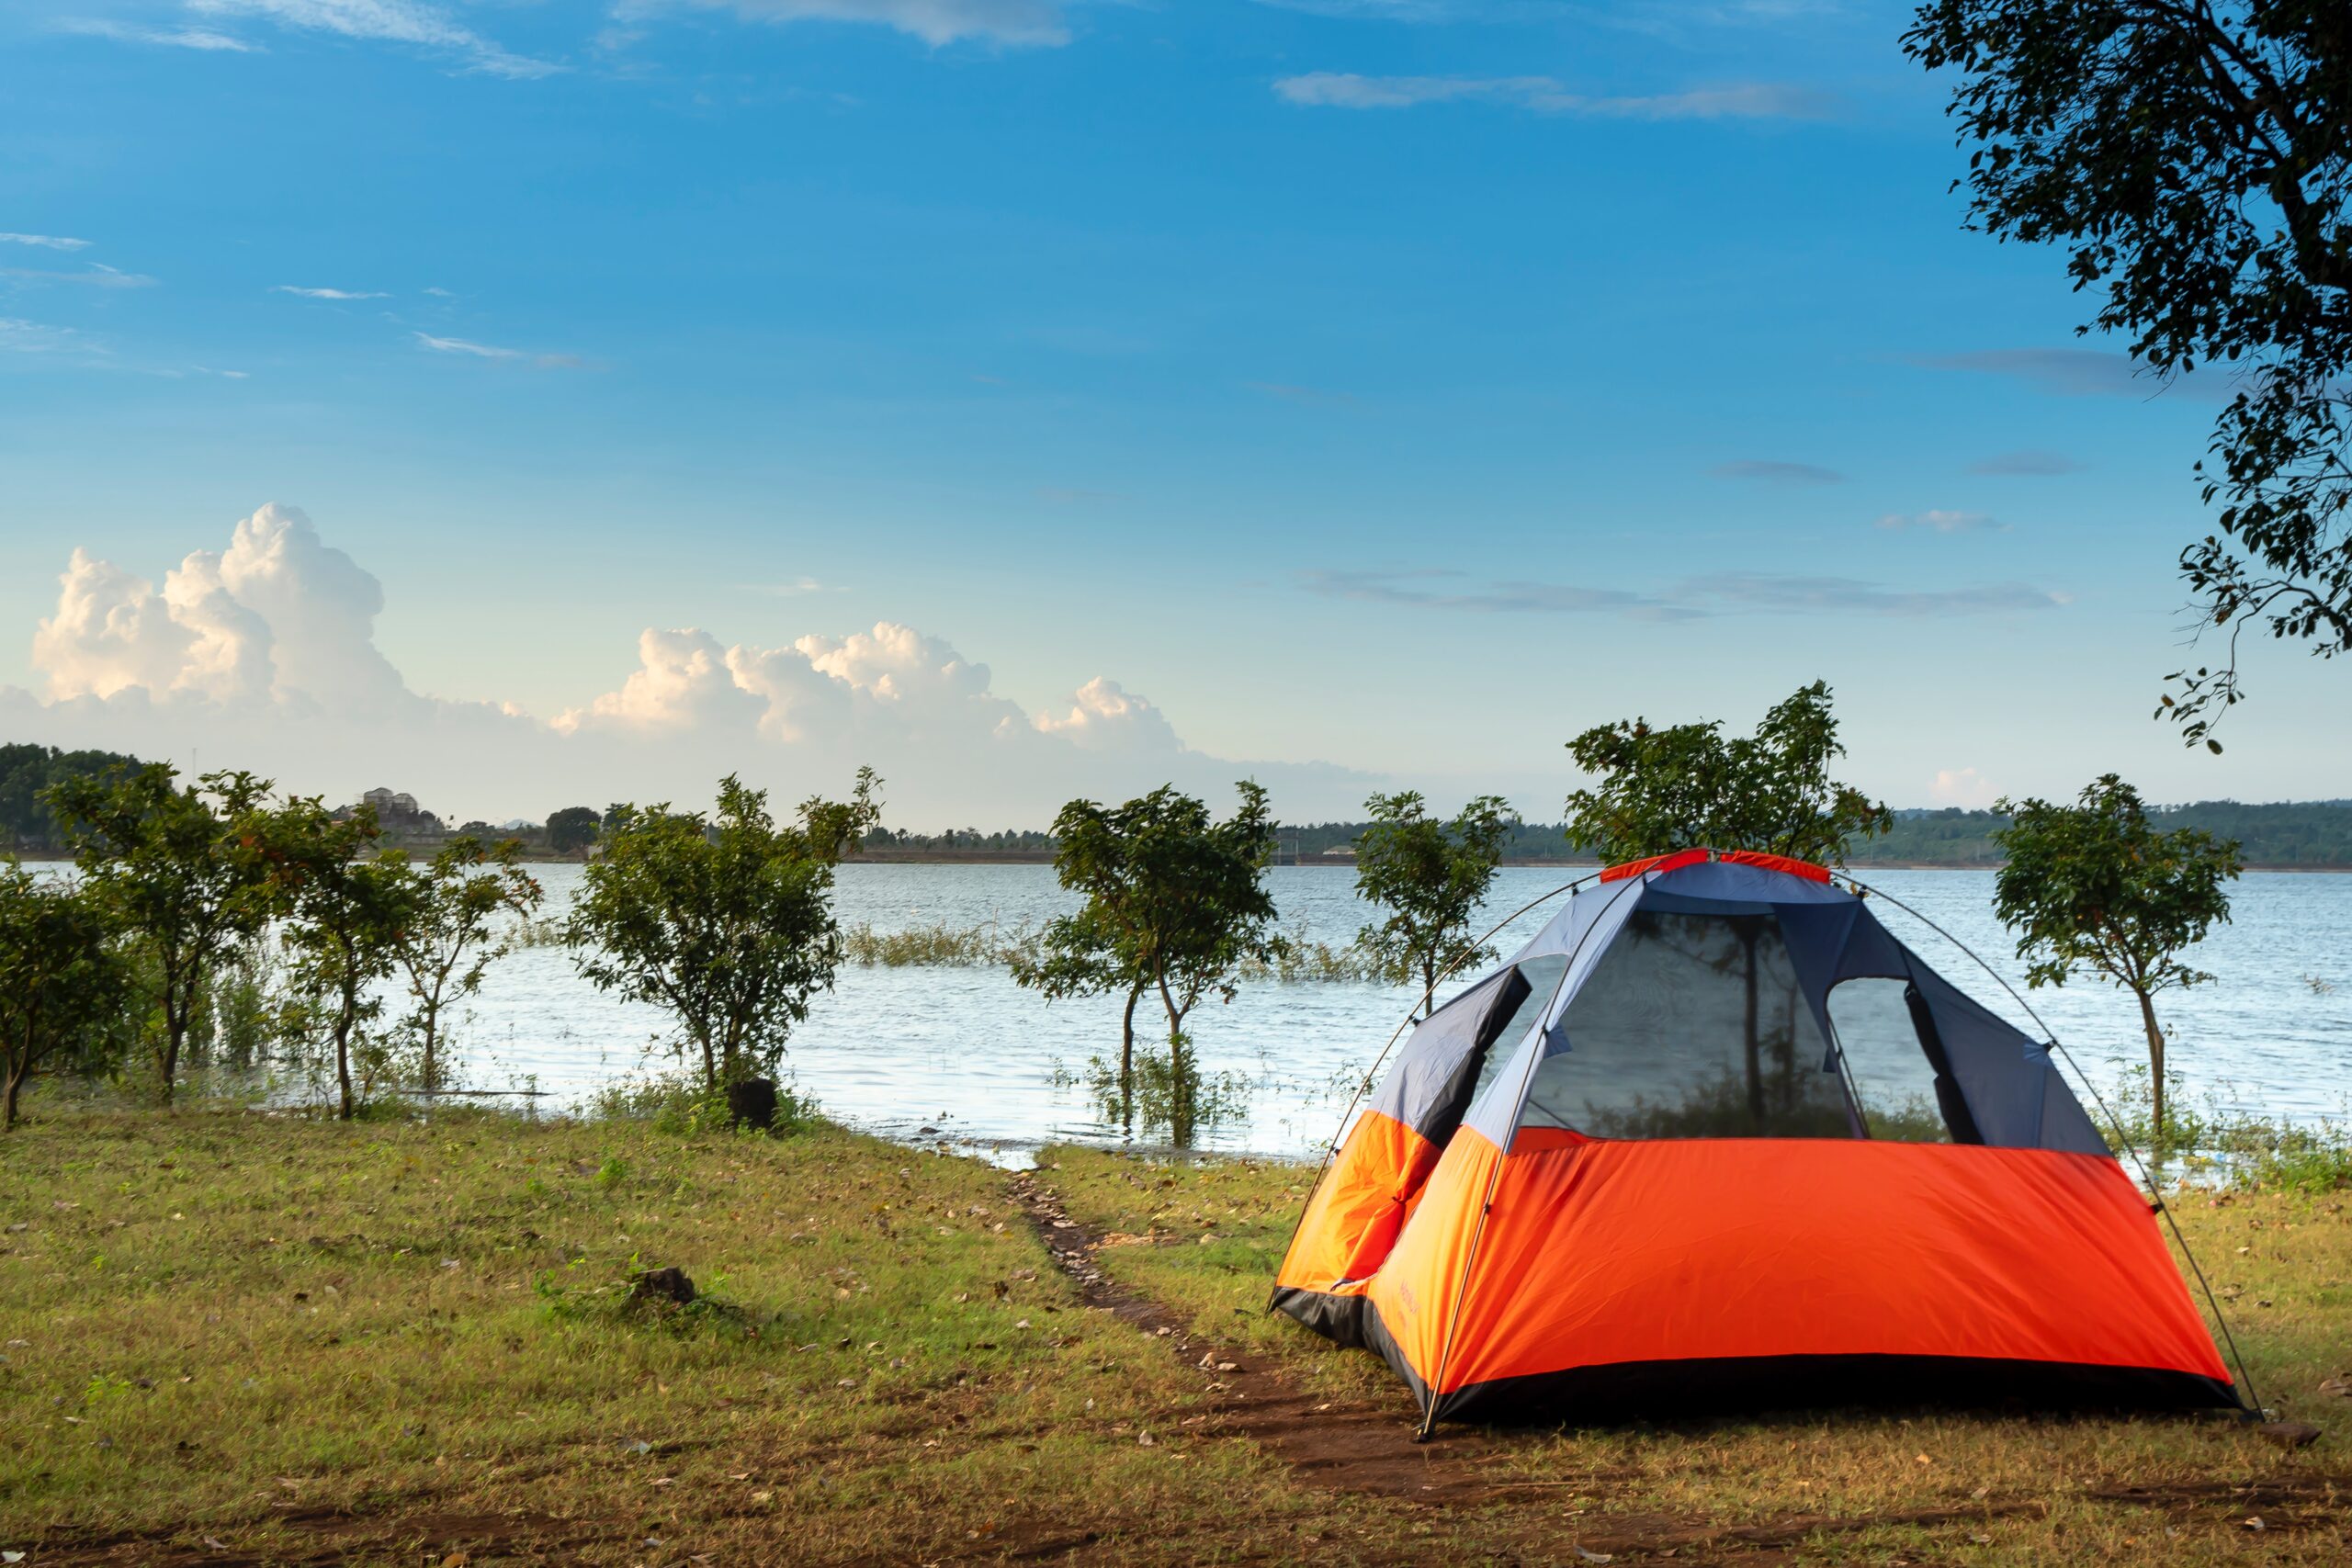 Camping Dome Tent Near a Body of Water